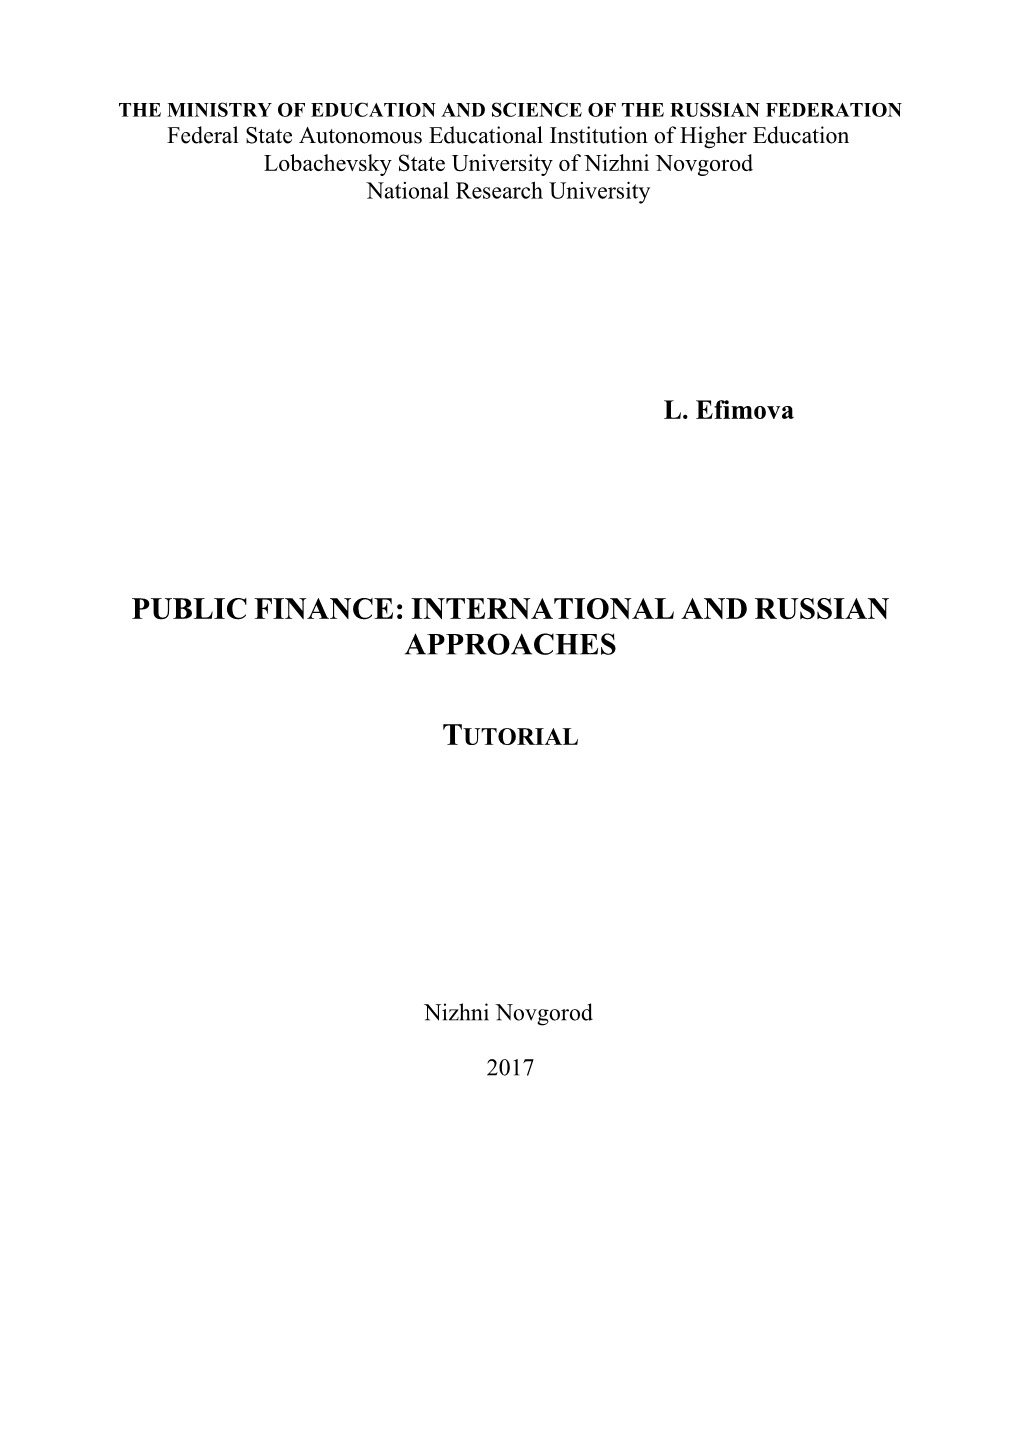 Public Finance: International and Russian Approaches